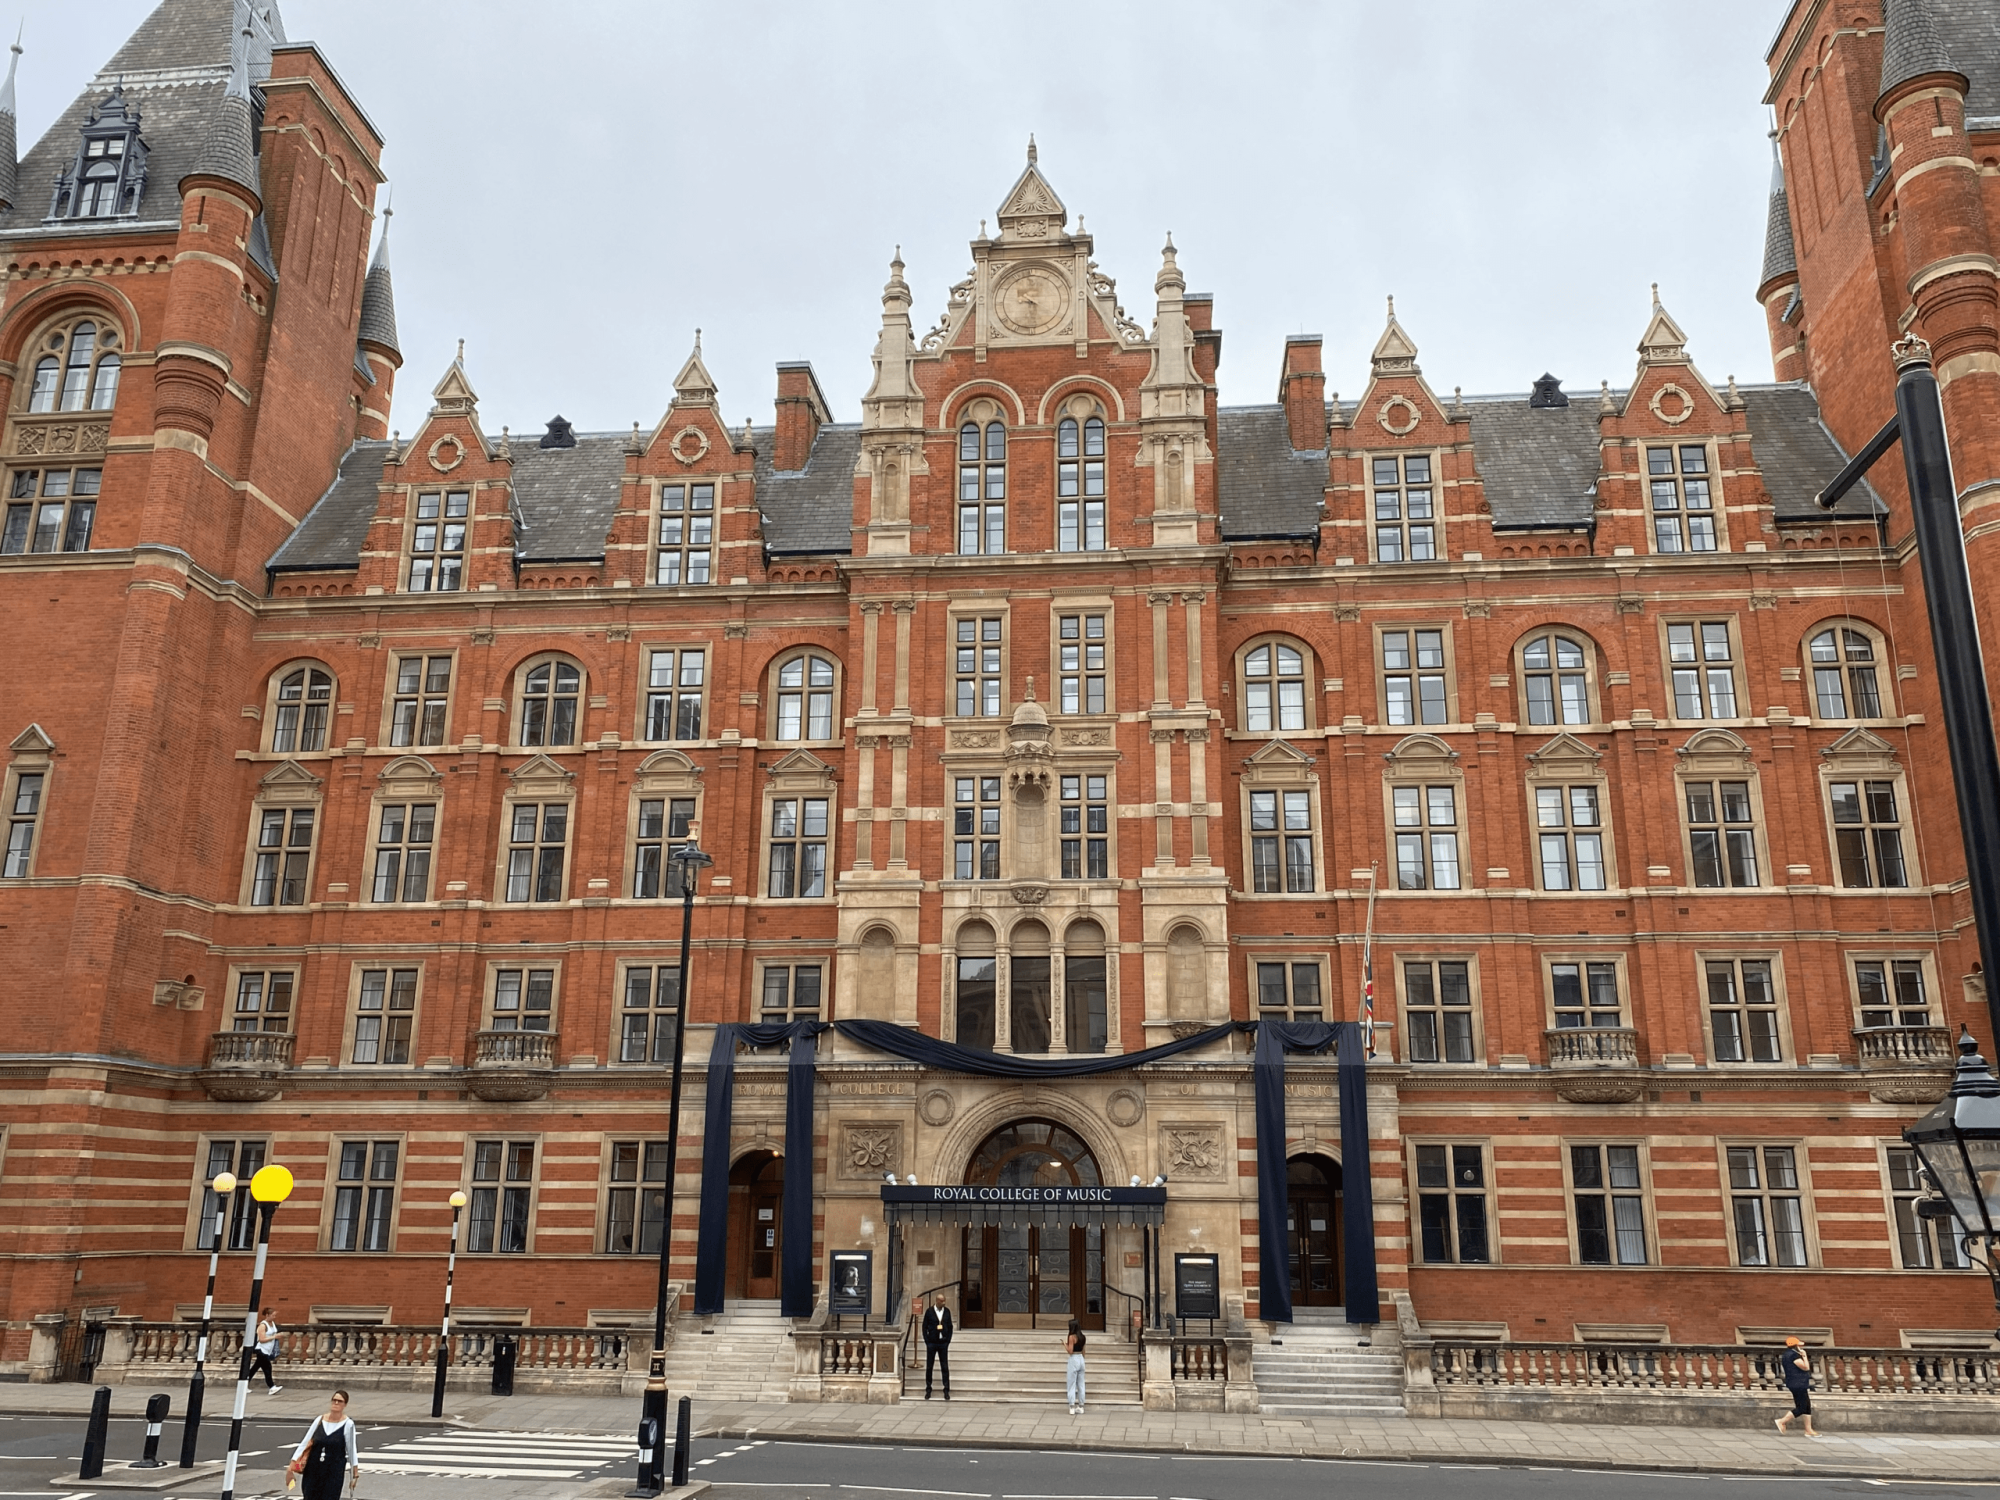 Artic Building Services Wins M&E Contract at Royal College of Music